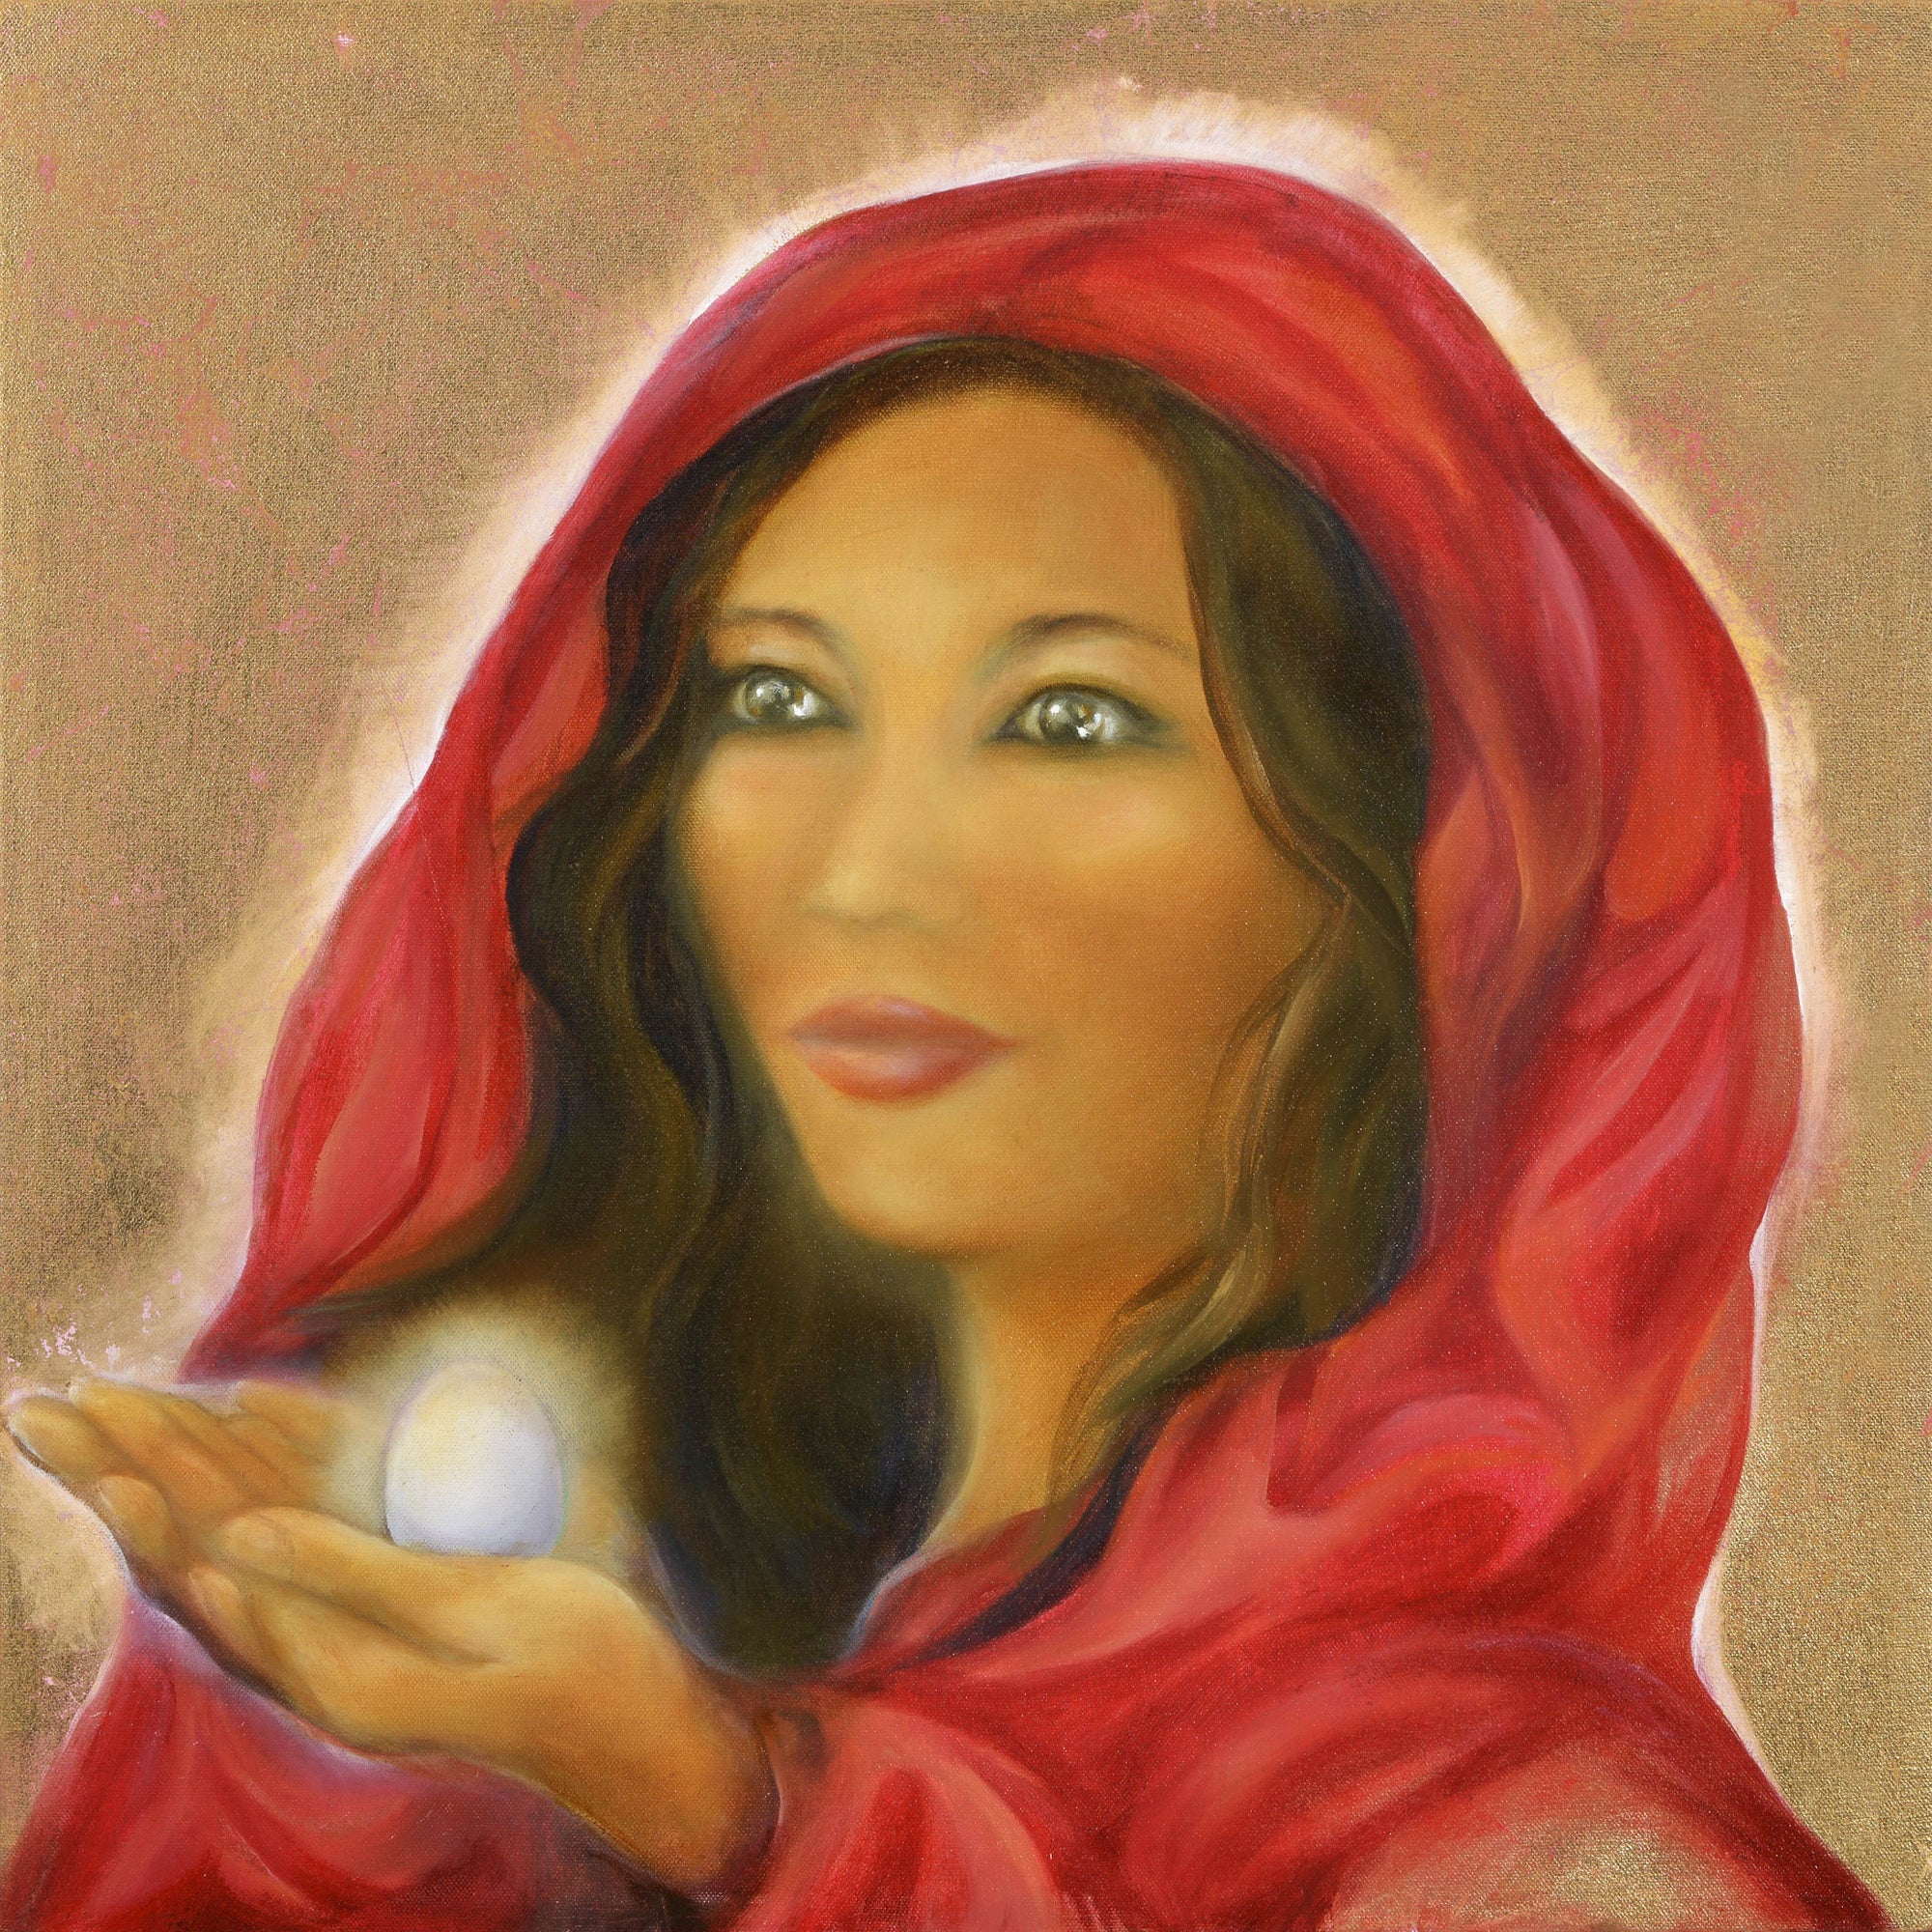 Activated Mary Magdalena Portrait by Britten